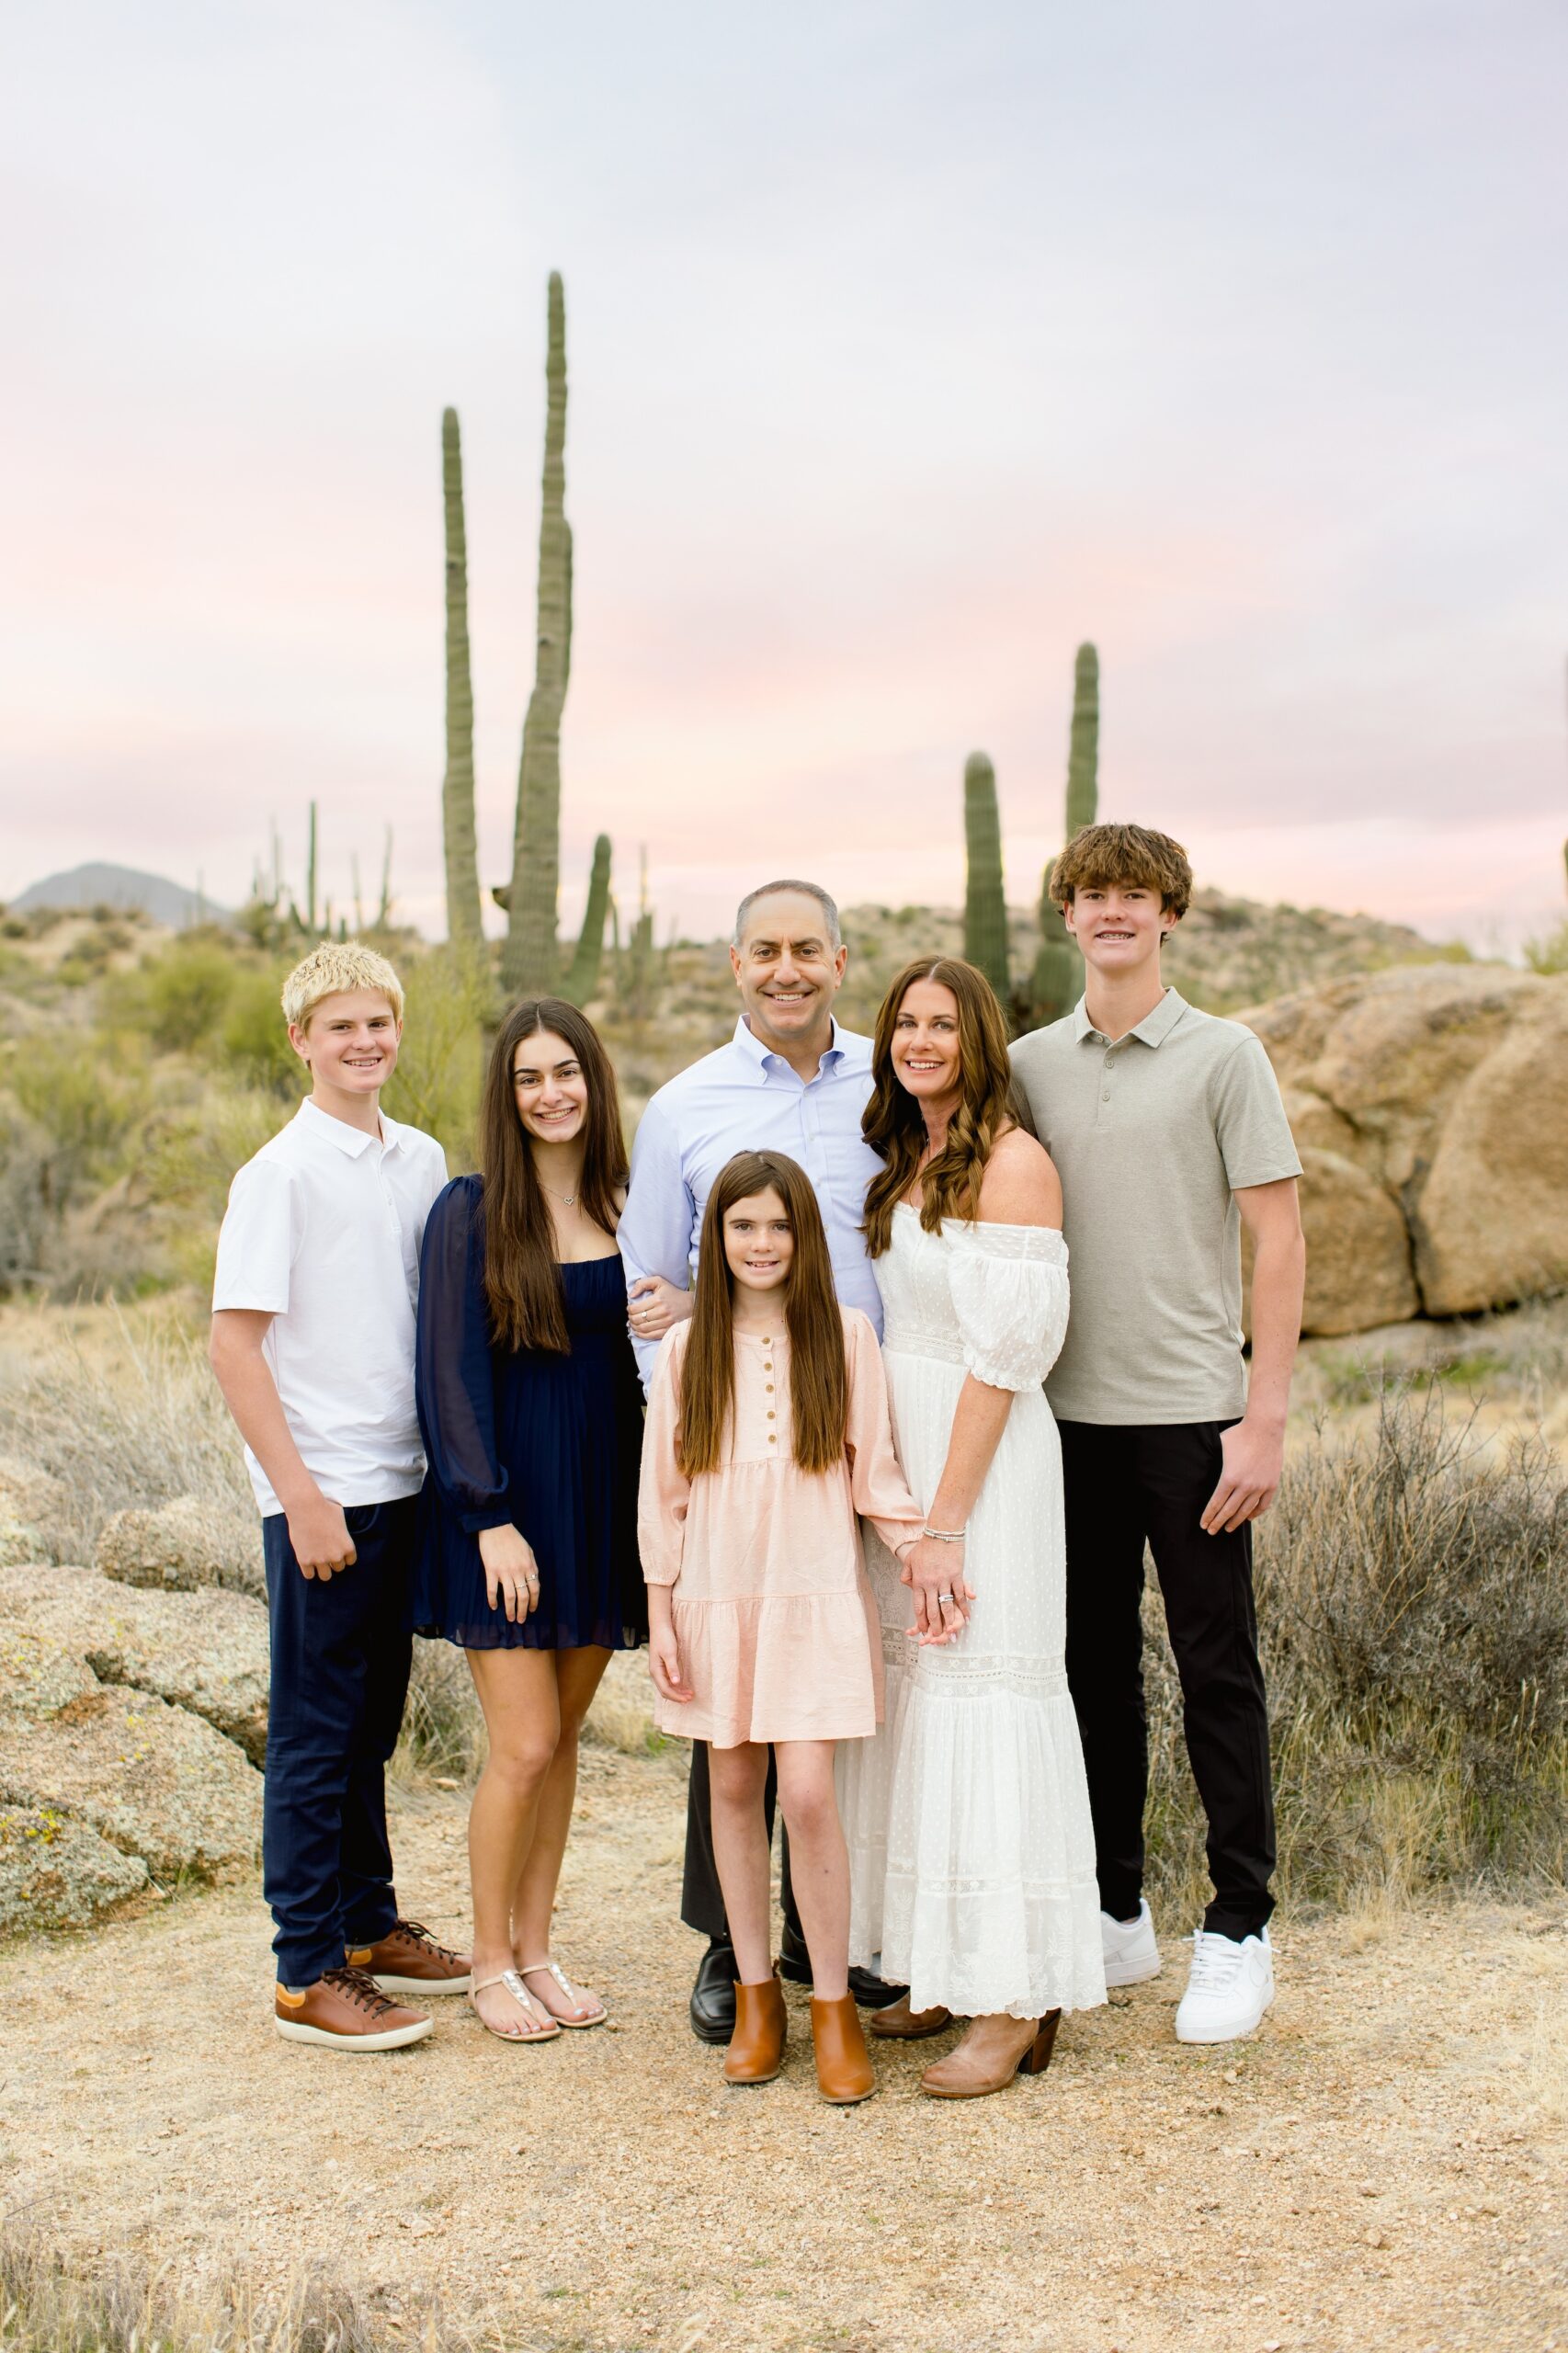 Family of 6 in the Arizona desert during golden hour. Mom, Dad, two girls, and two boys.